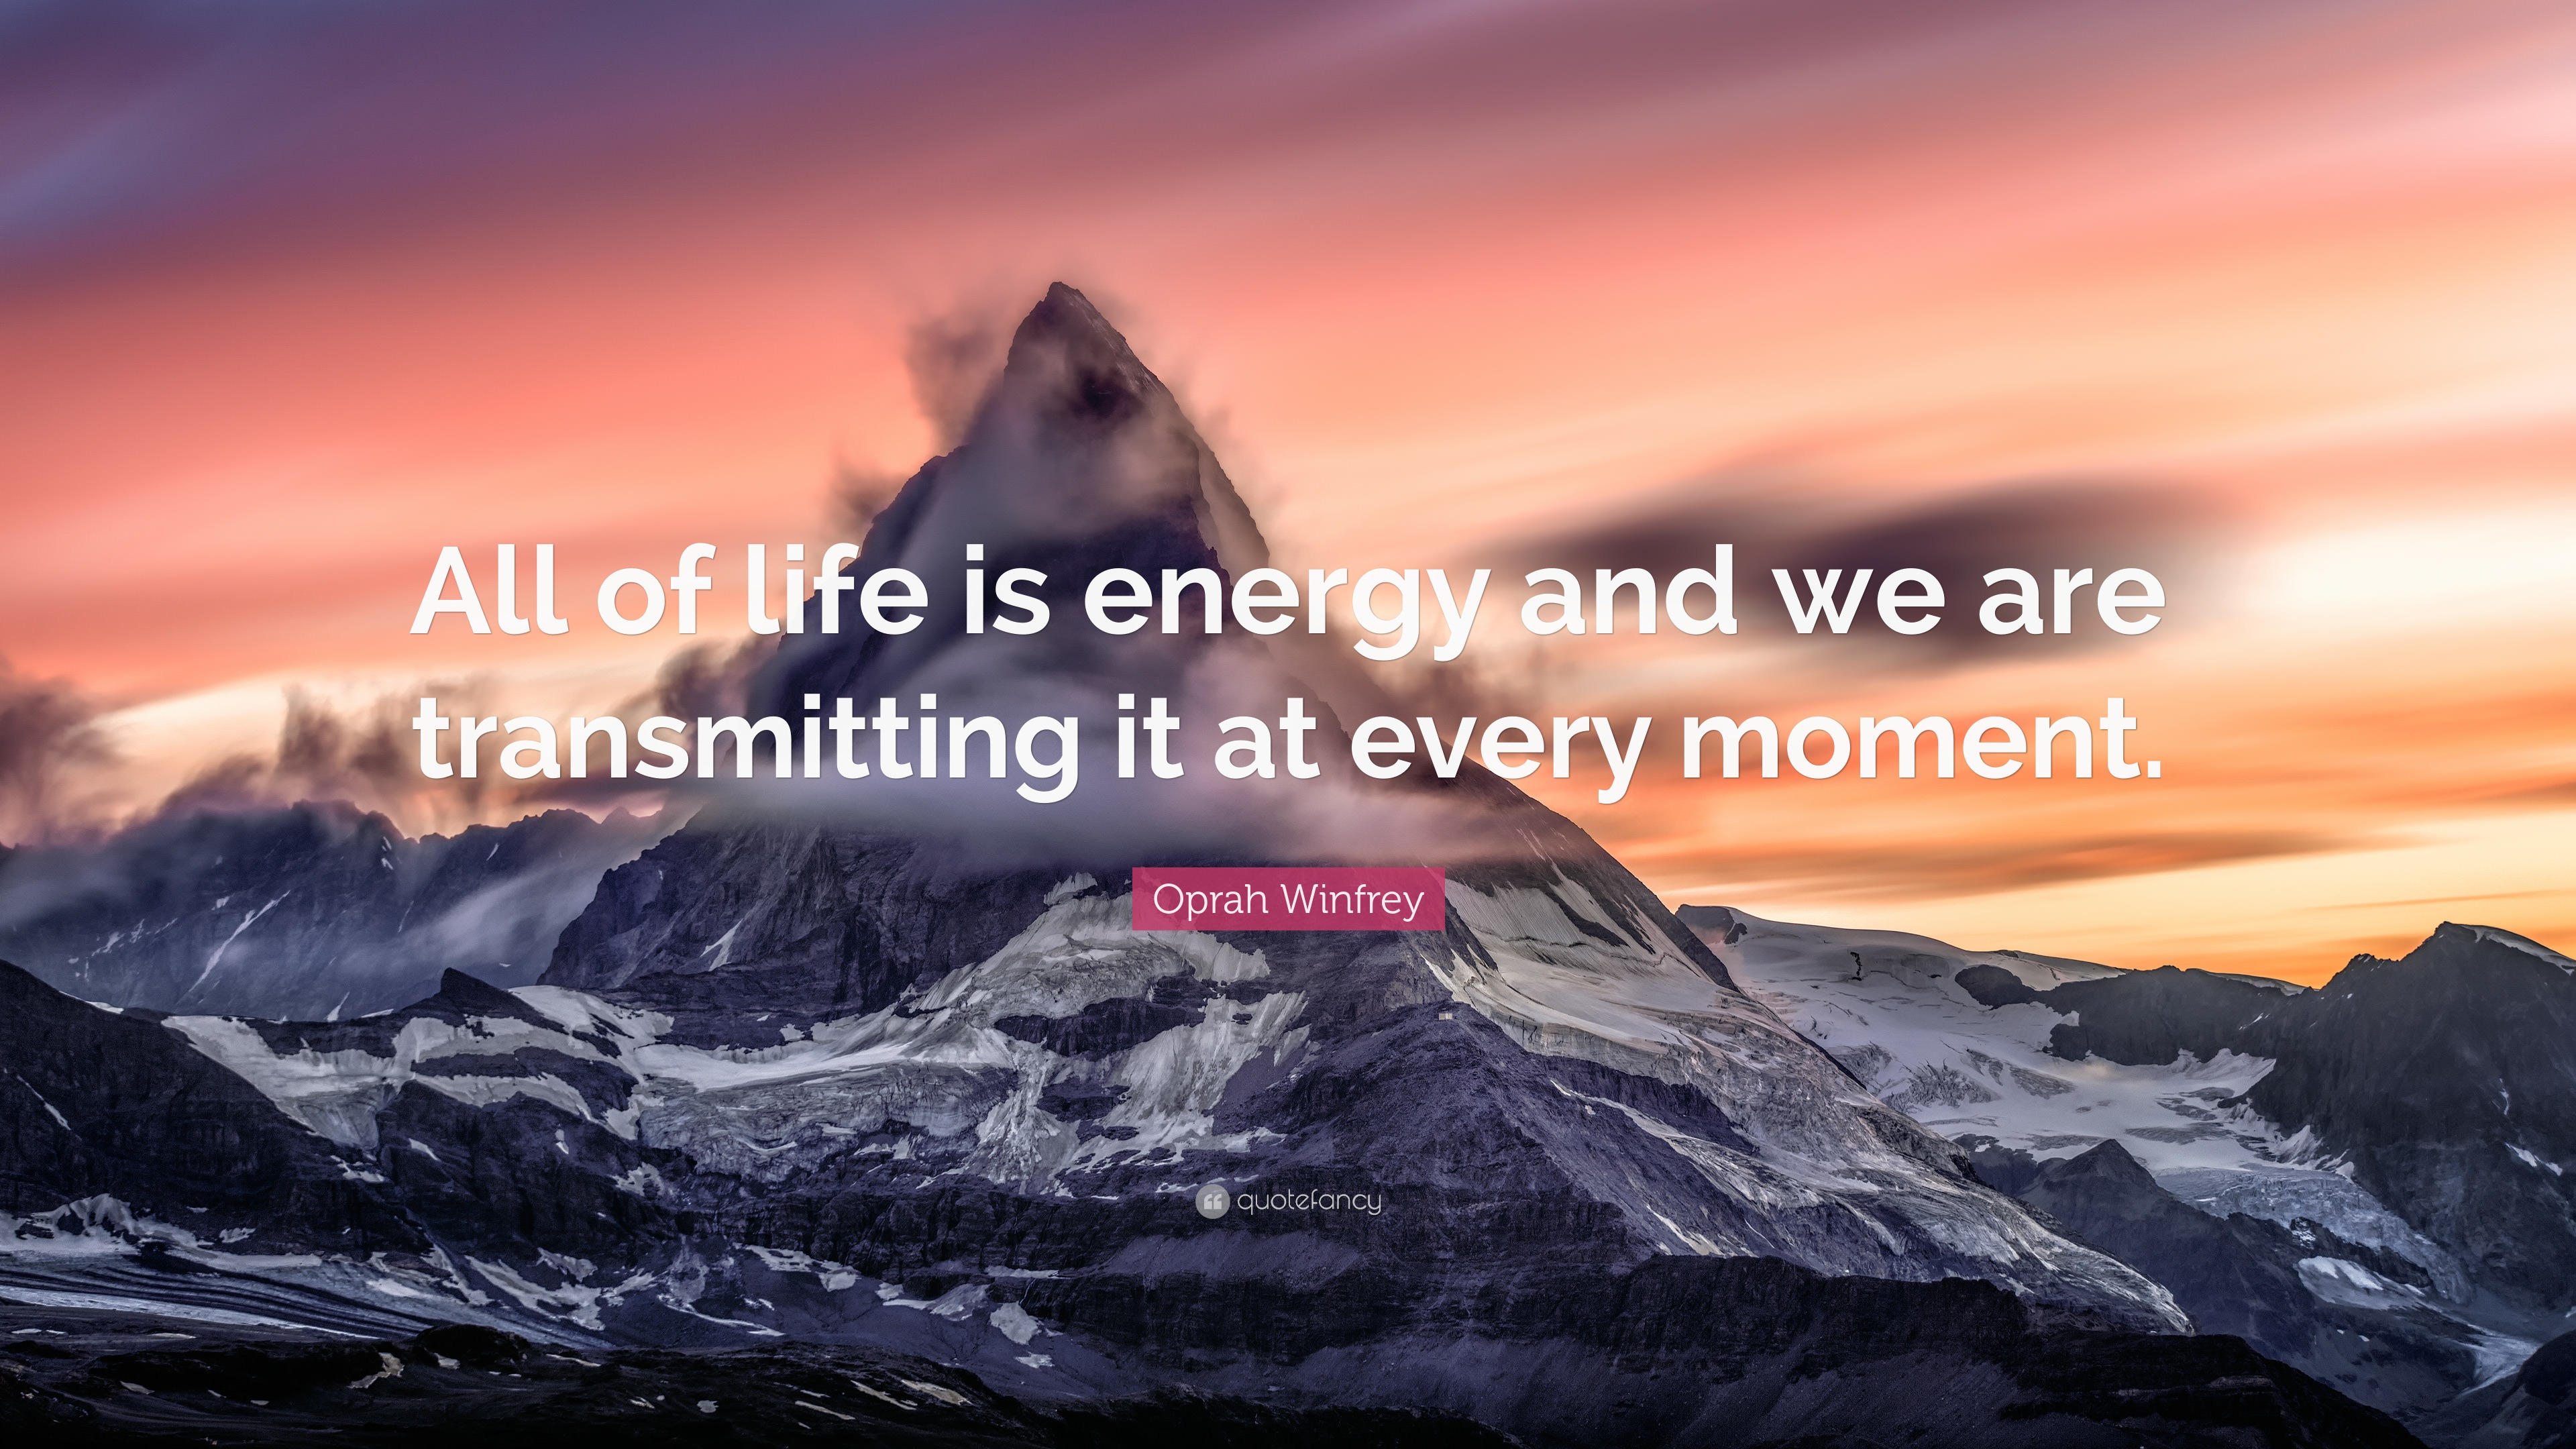 Oprah Winfrey Quote: “All of life is energy and we are transmitting it ...